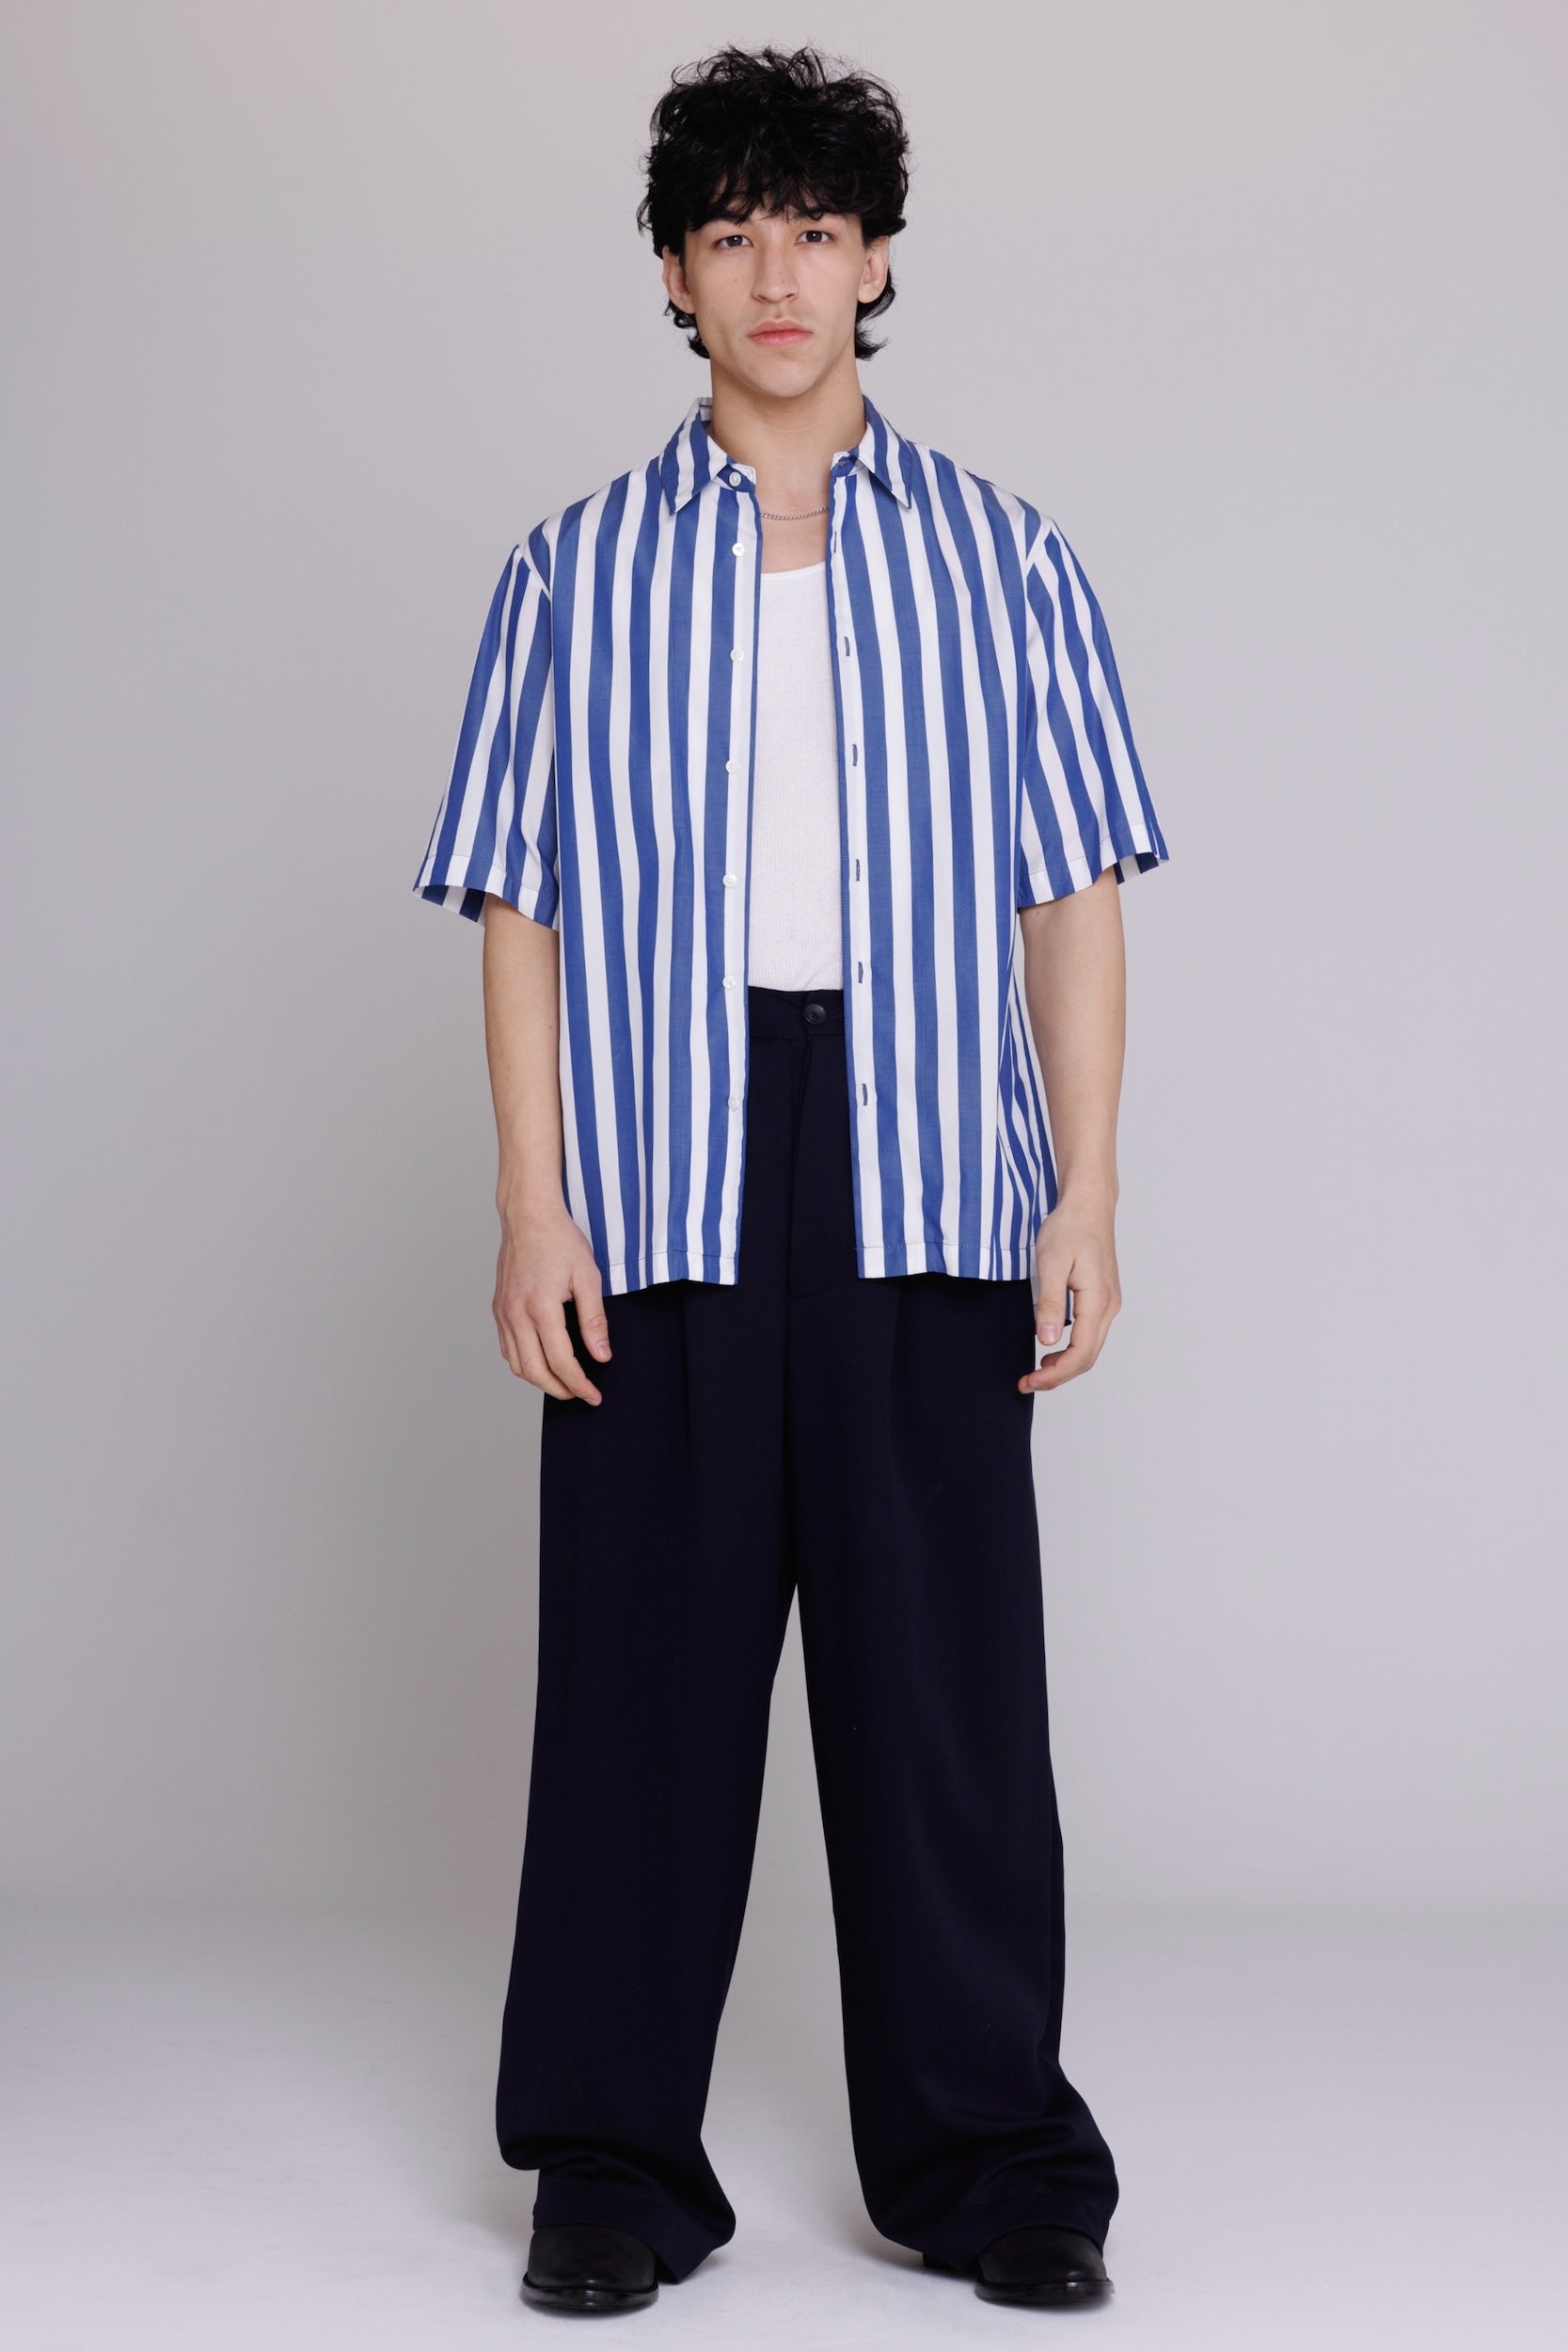 "Flowers" Button Up Shirt in Blue & White Bar Stripes